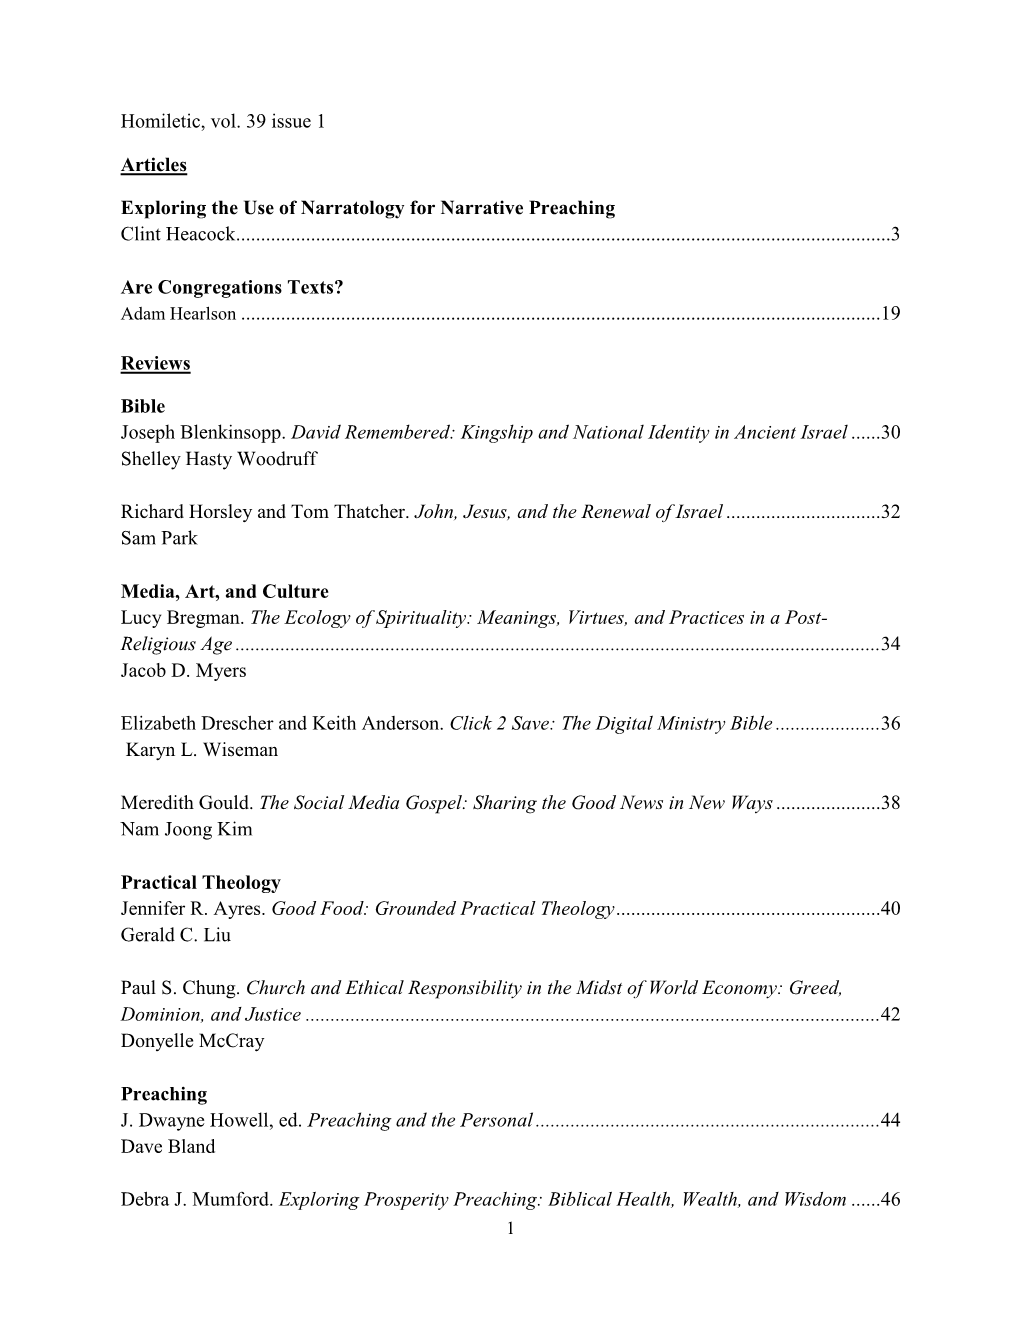 Homiletic, Vol. 39 Issue 1 Articles Exploring the Use of Narratology for Narrative Preaching Clint Heacock